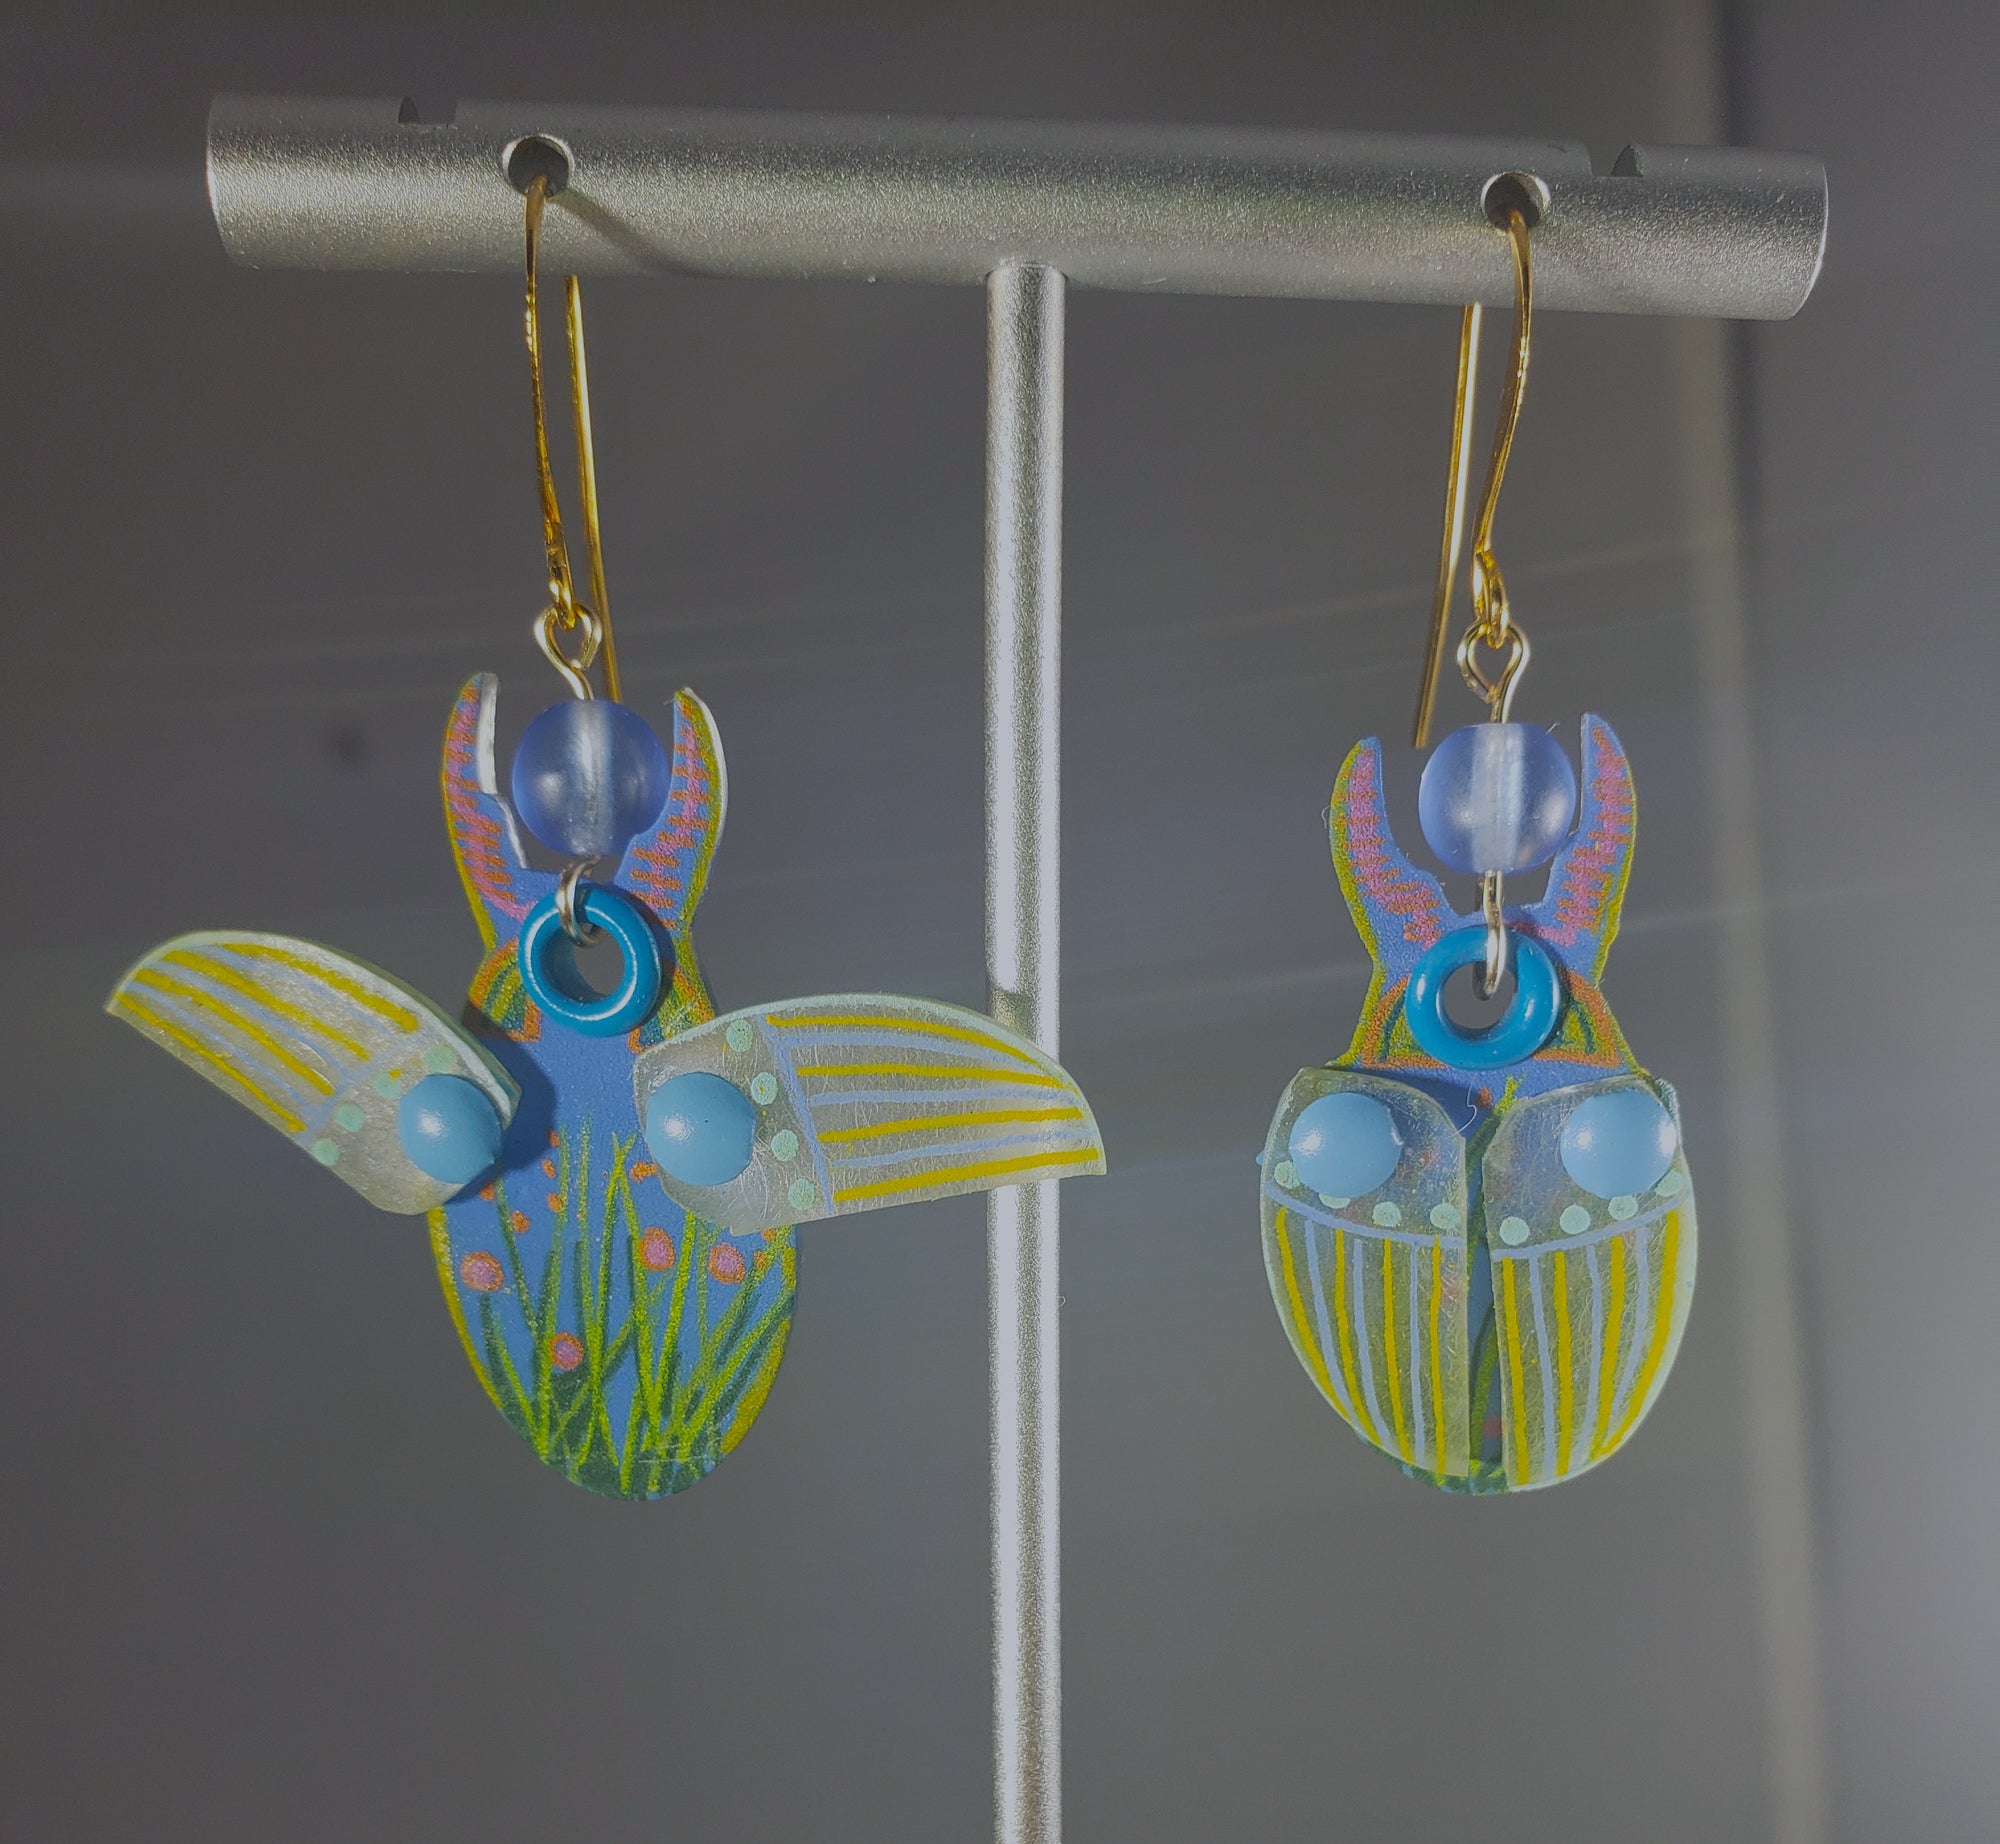 A014 Pastel Beetle earrings with articulated wings